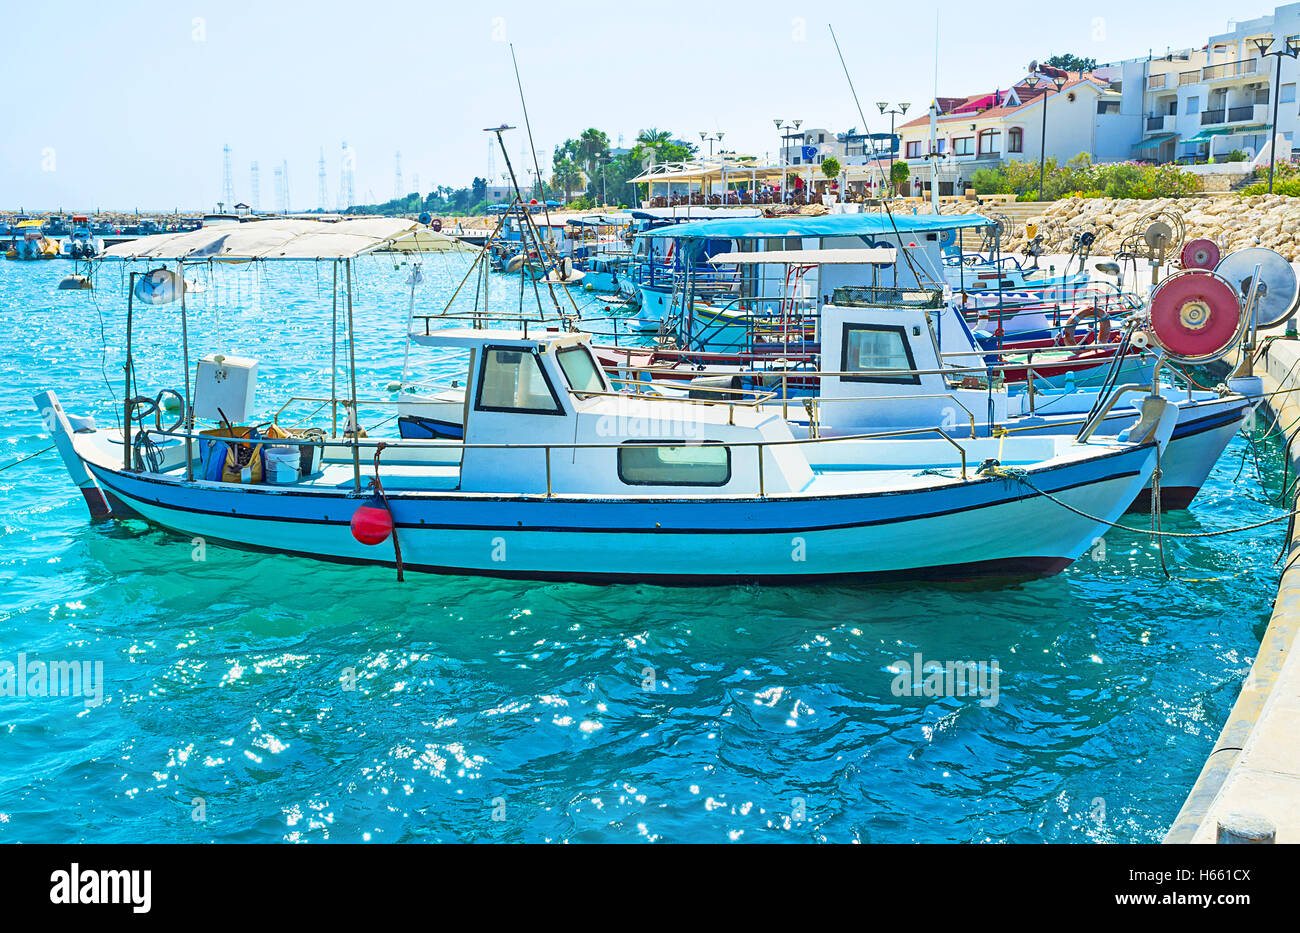 The old fishing boats are waving on the waves in the small port of Zugi village, Cyprus. Stock Photo